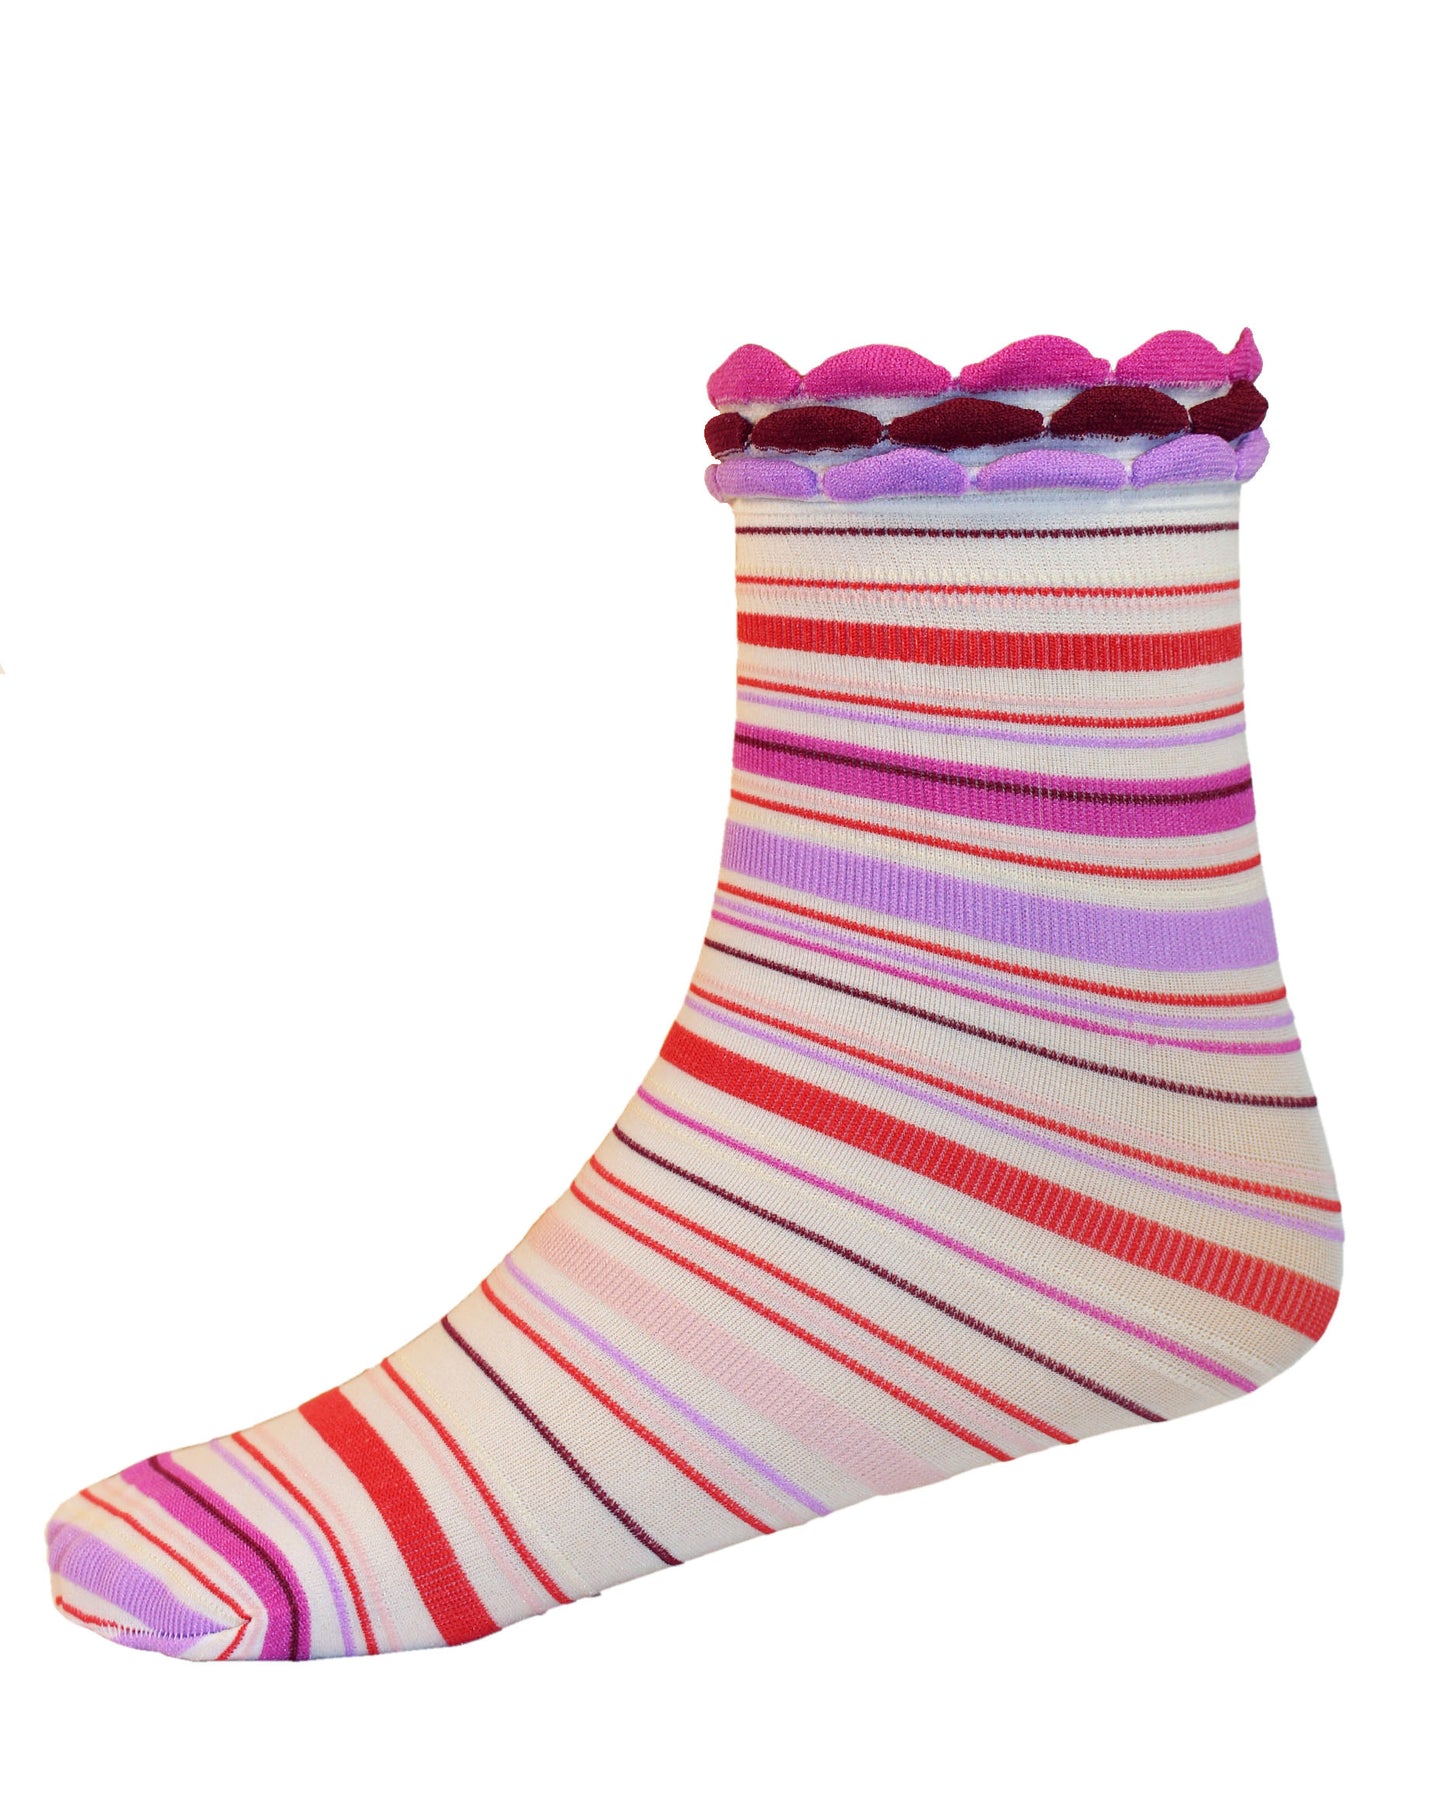 Omsa Crayons Calzino - White opaque fashion socks with colourful horizontal stripes in shades of red, pink and purple and a ruched style cuff.